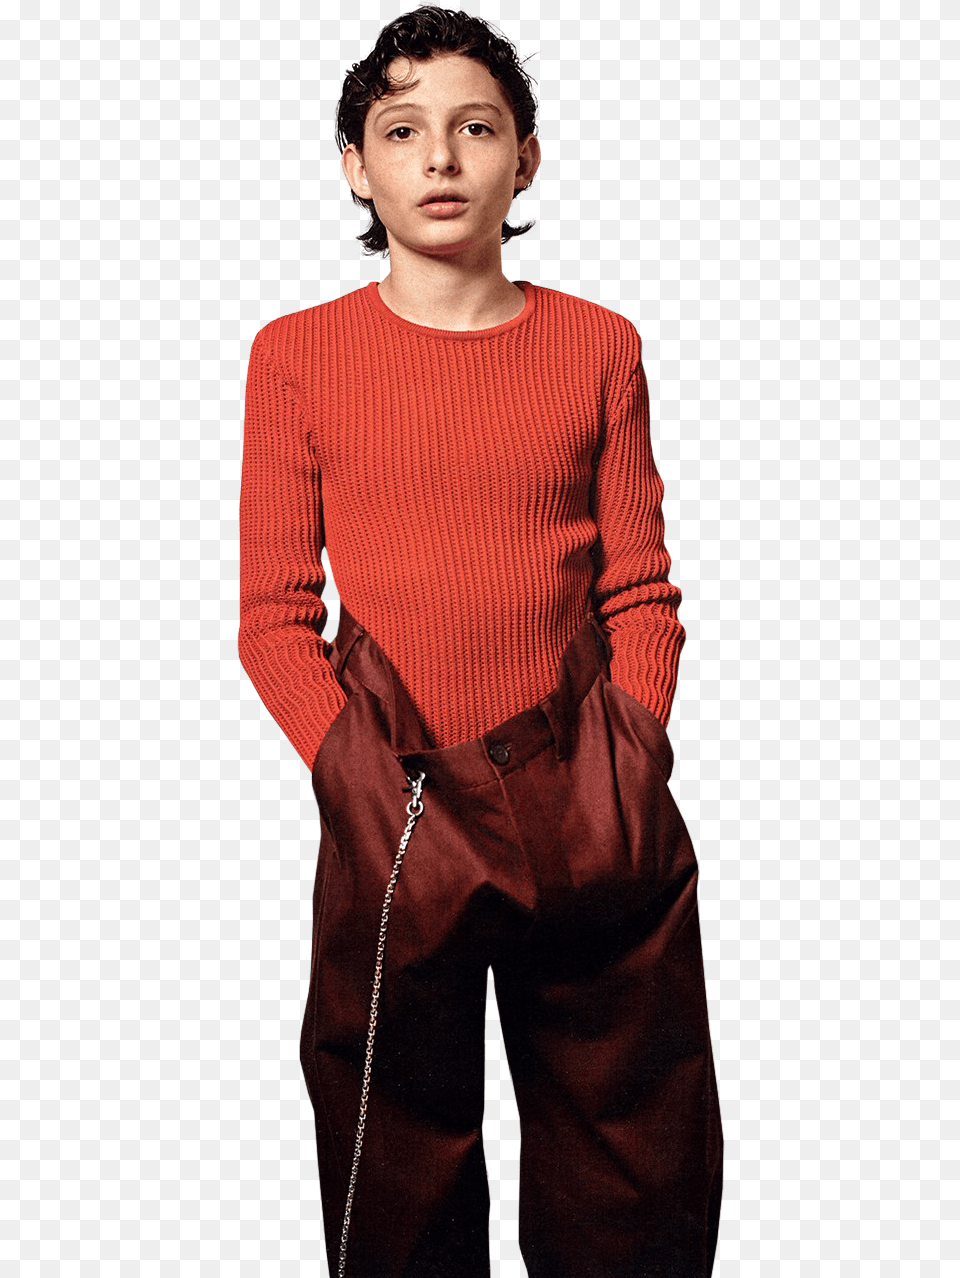 Pin By Lsrs00 On Finn Wolfhard In 2018 Collier Schorr Finn Wolfhard, Long Sleeve, Blouse, Clothing, Sleeve Free Transparent Png